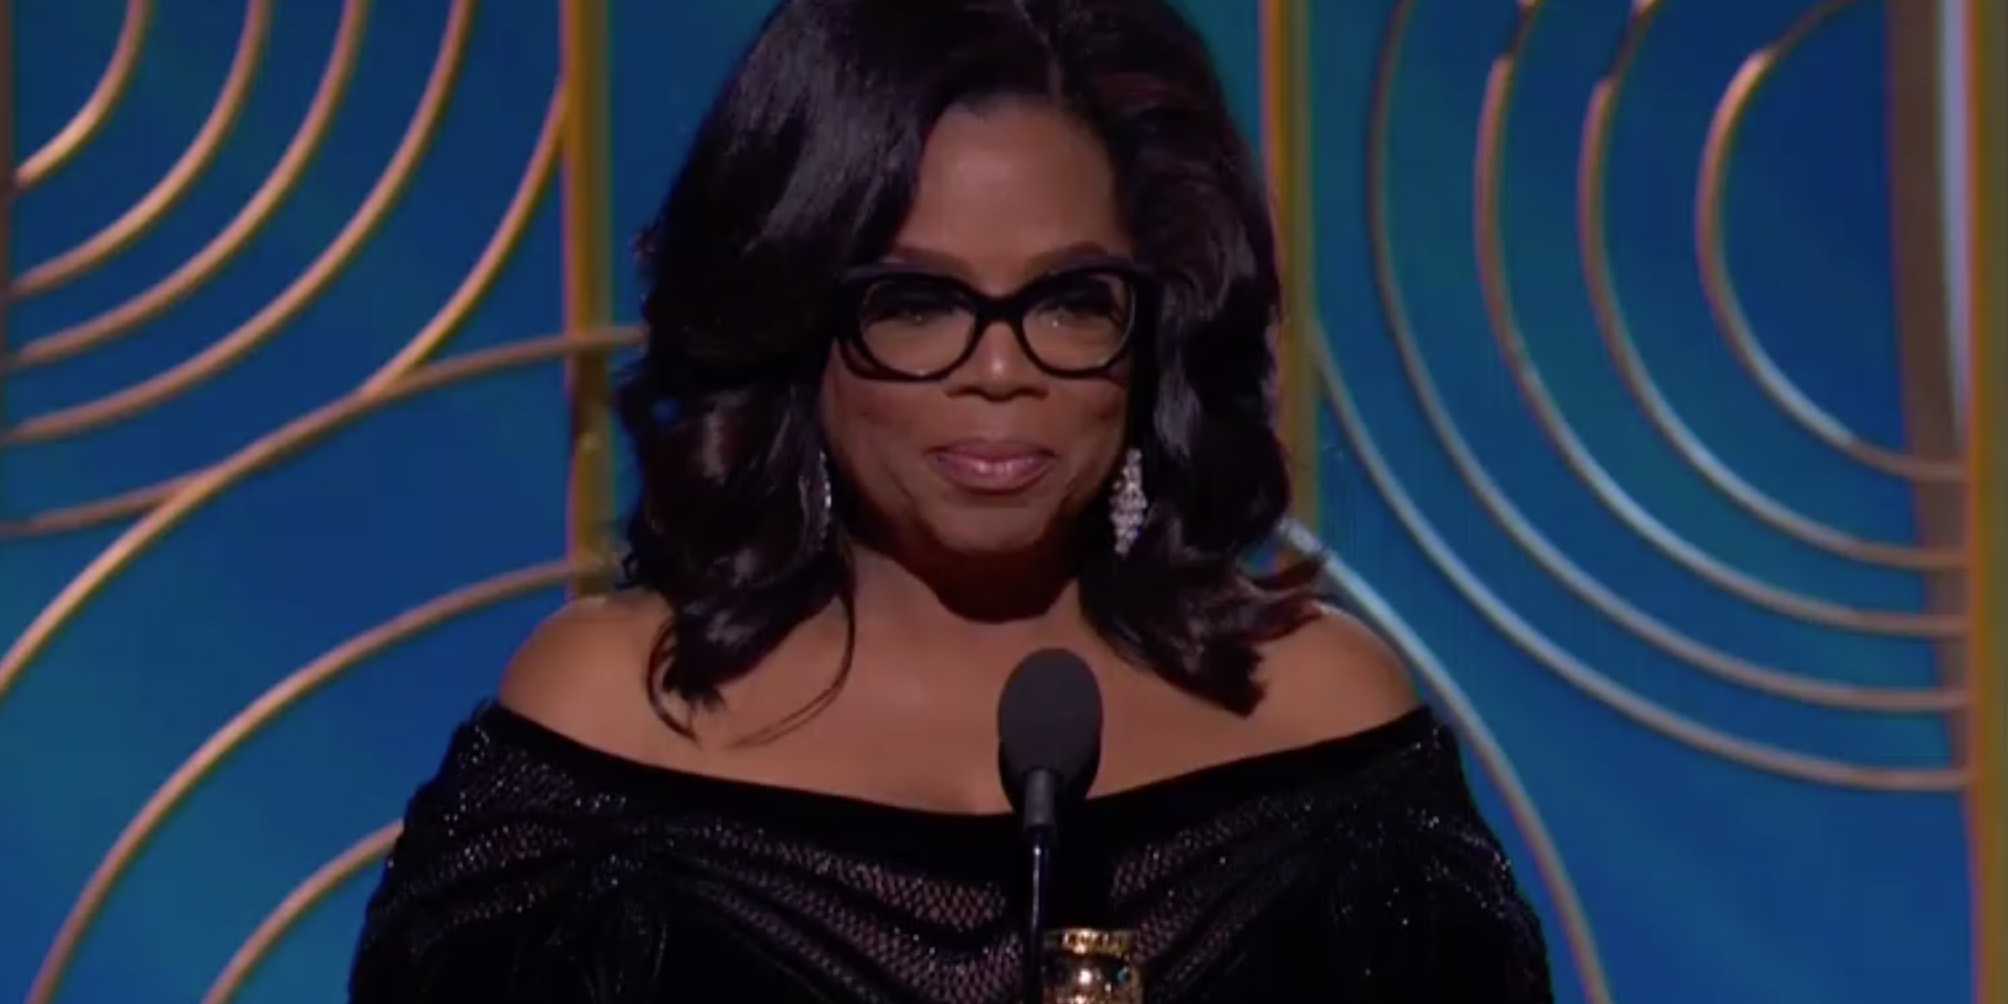 Report: Oprah Winfrey 'actively thinking' about running for president